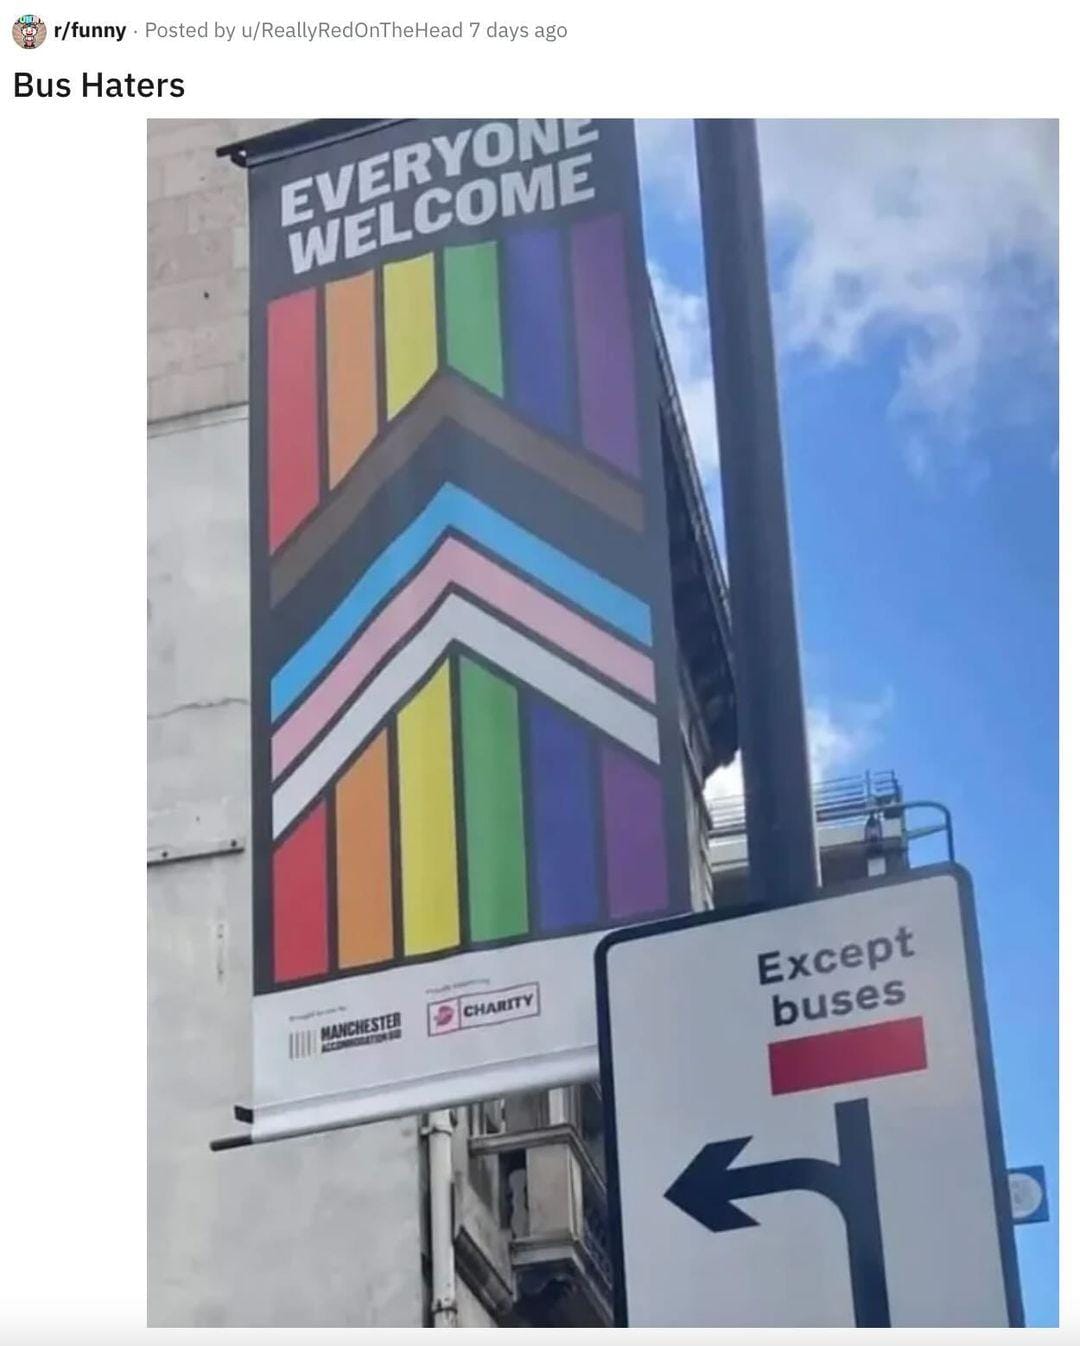 everyone welcome, except buses, bus haters, street sign